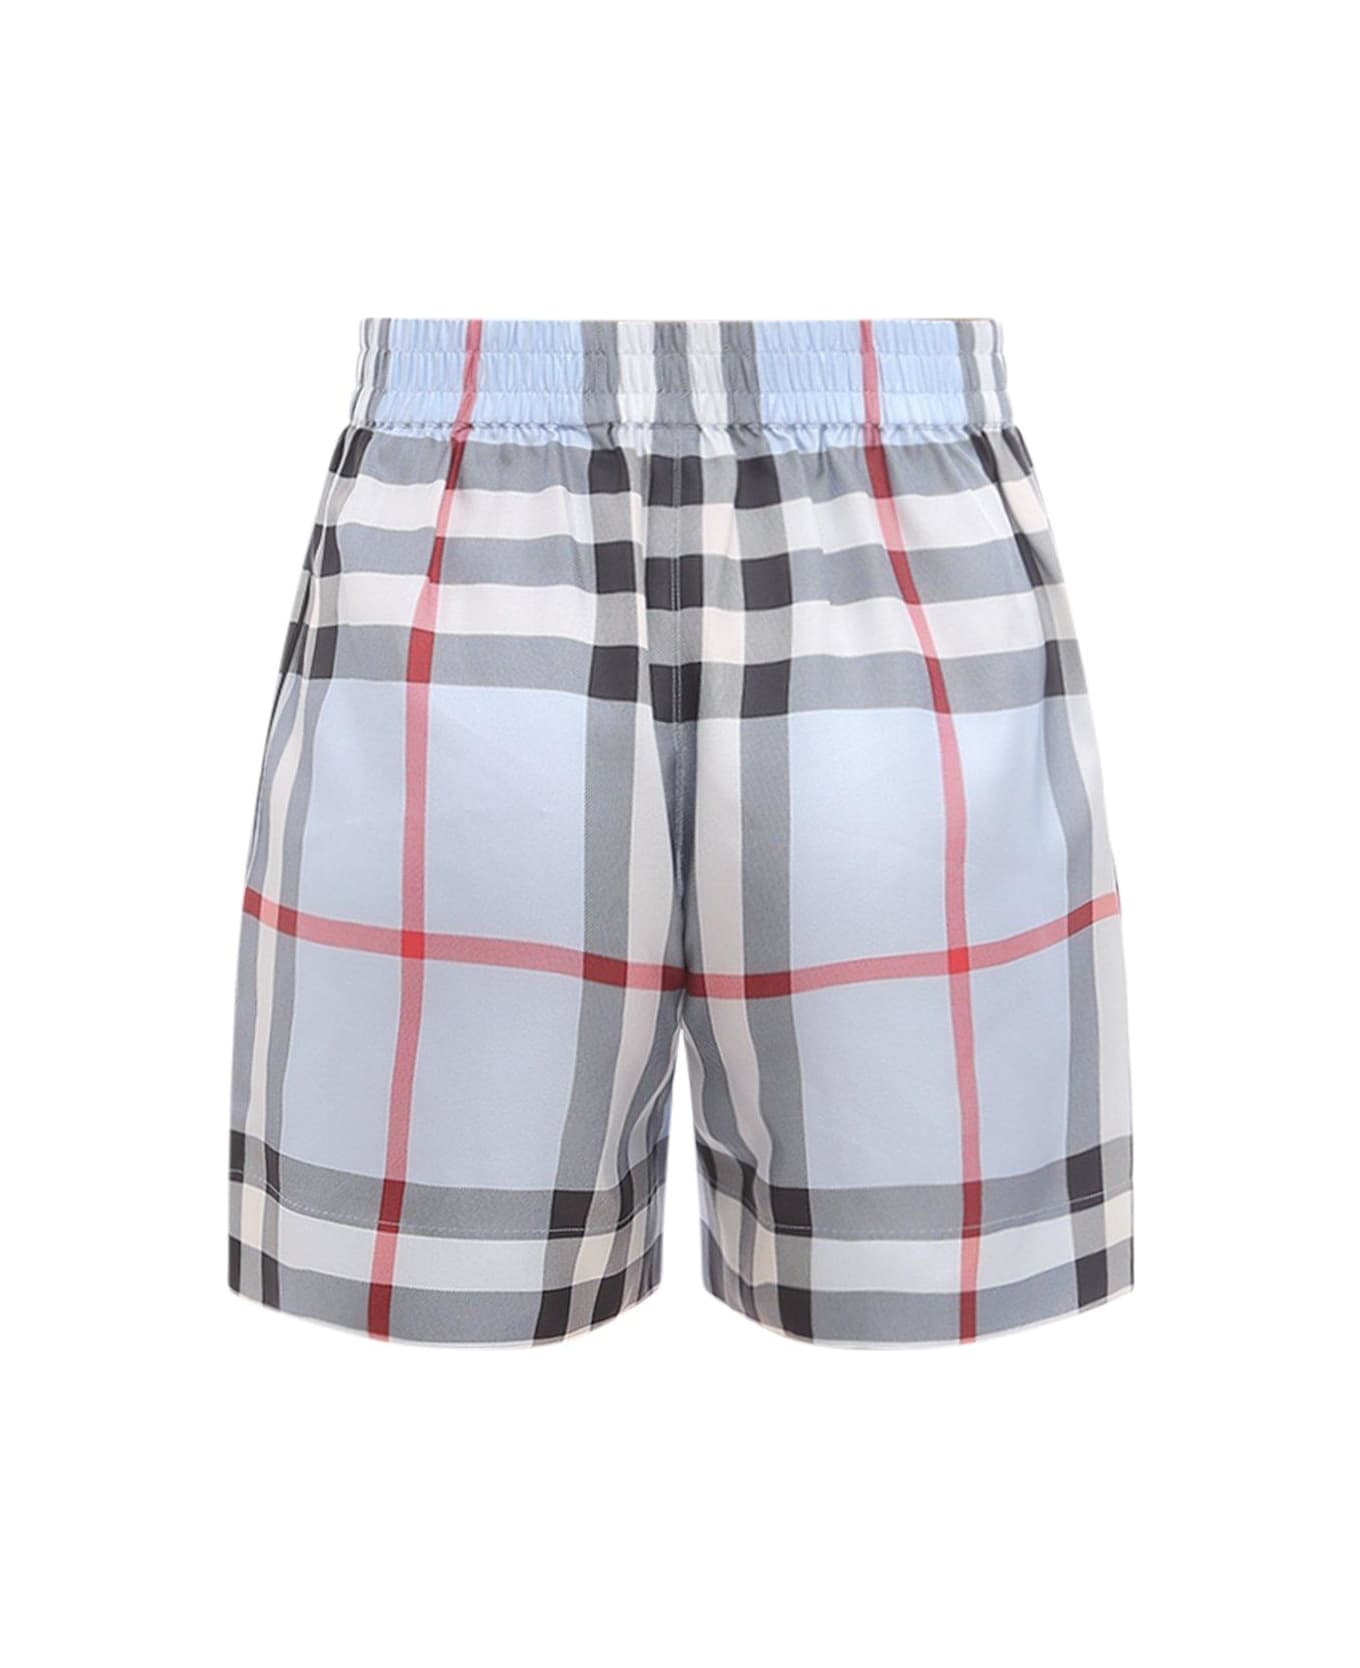 Burberry Check Patterned Bermuda Shorts - BLUE